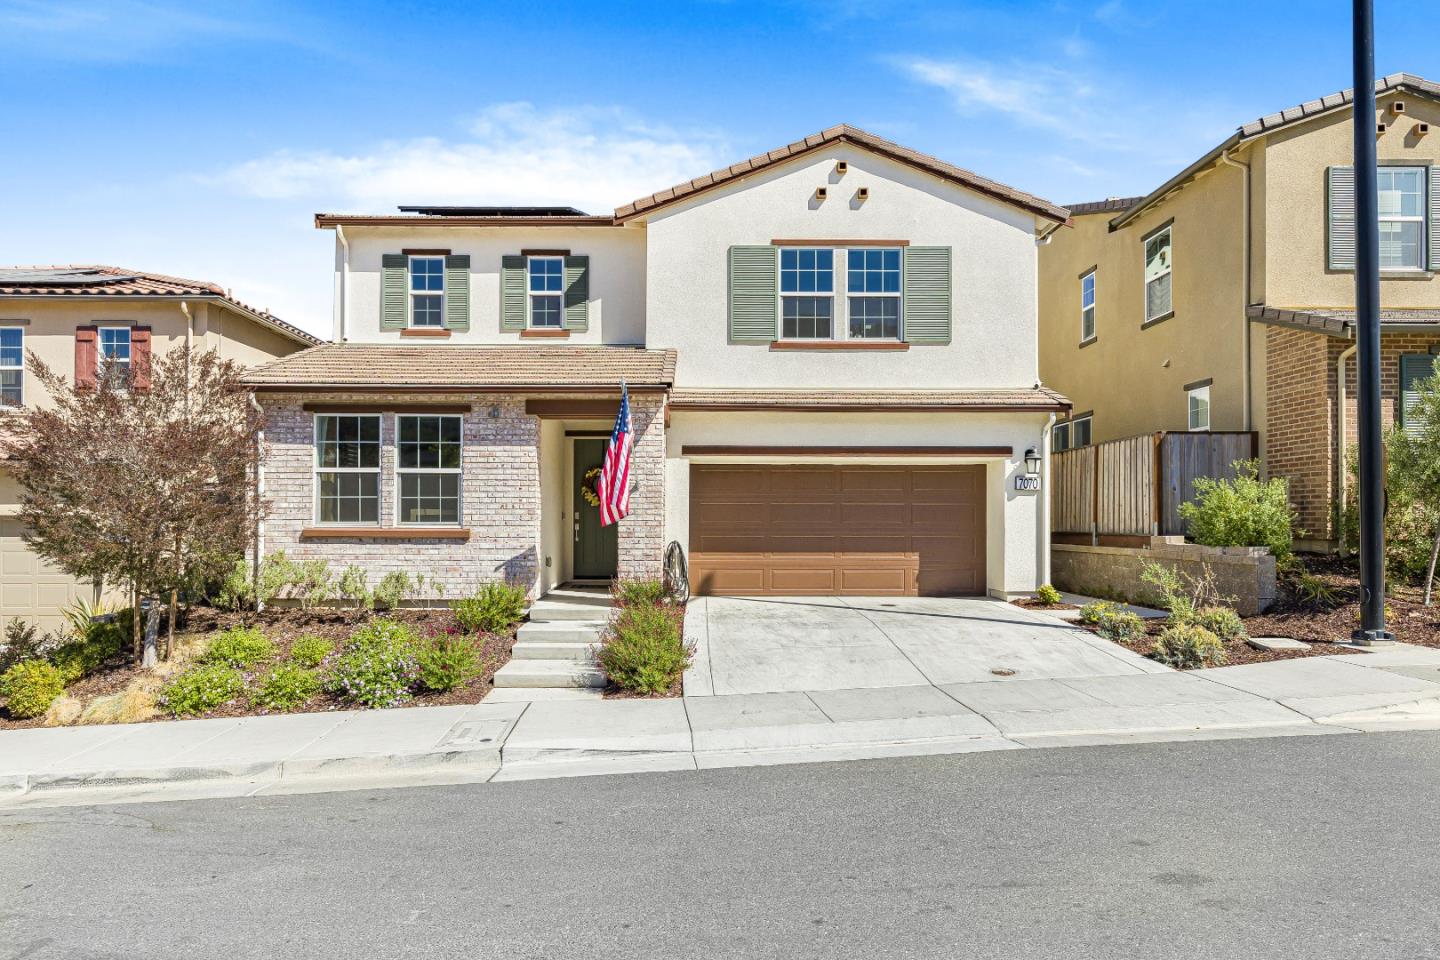 Photo of 7070 Spumante Wy in Gilroy, CA